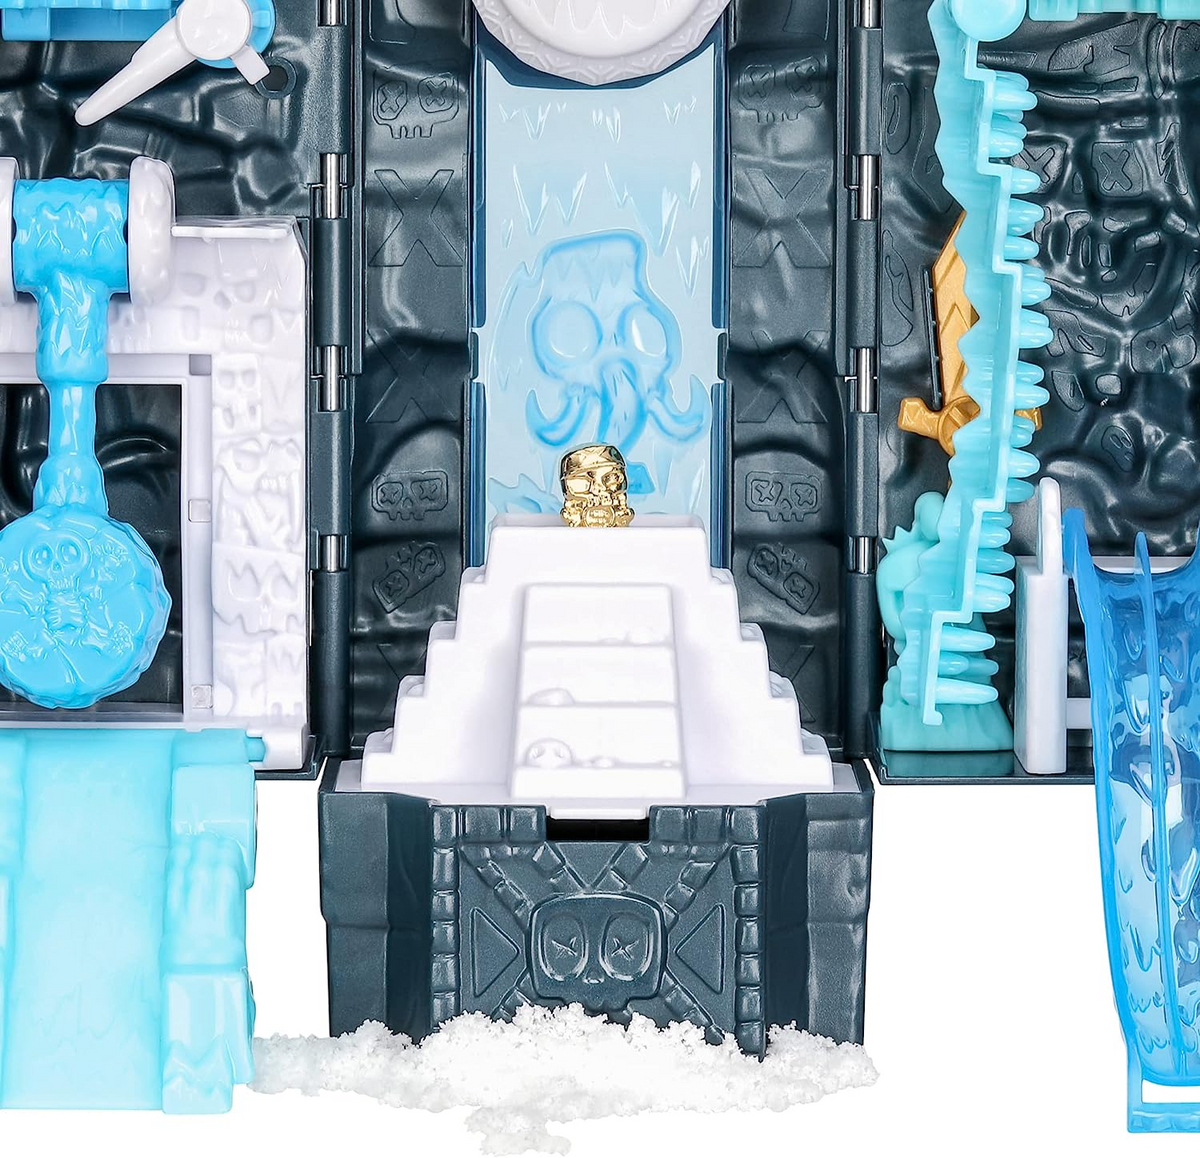 TREASURE X Lost Lands Skull Island Frost Tower Micro Playset, 15 Levels of  Adventure. Survive The Traps and Discover 2 Micro Sized Action Figures.